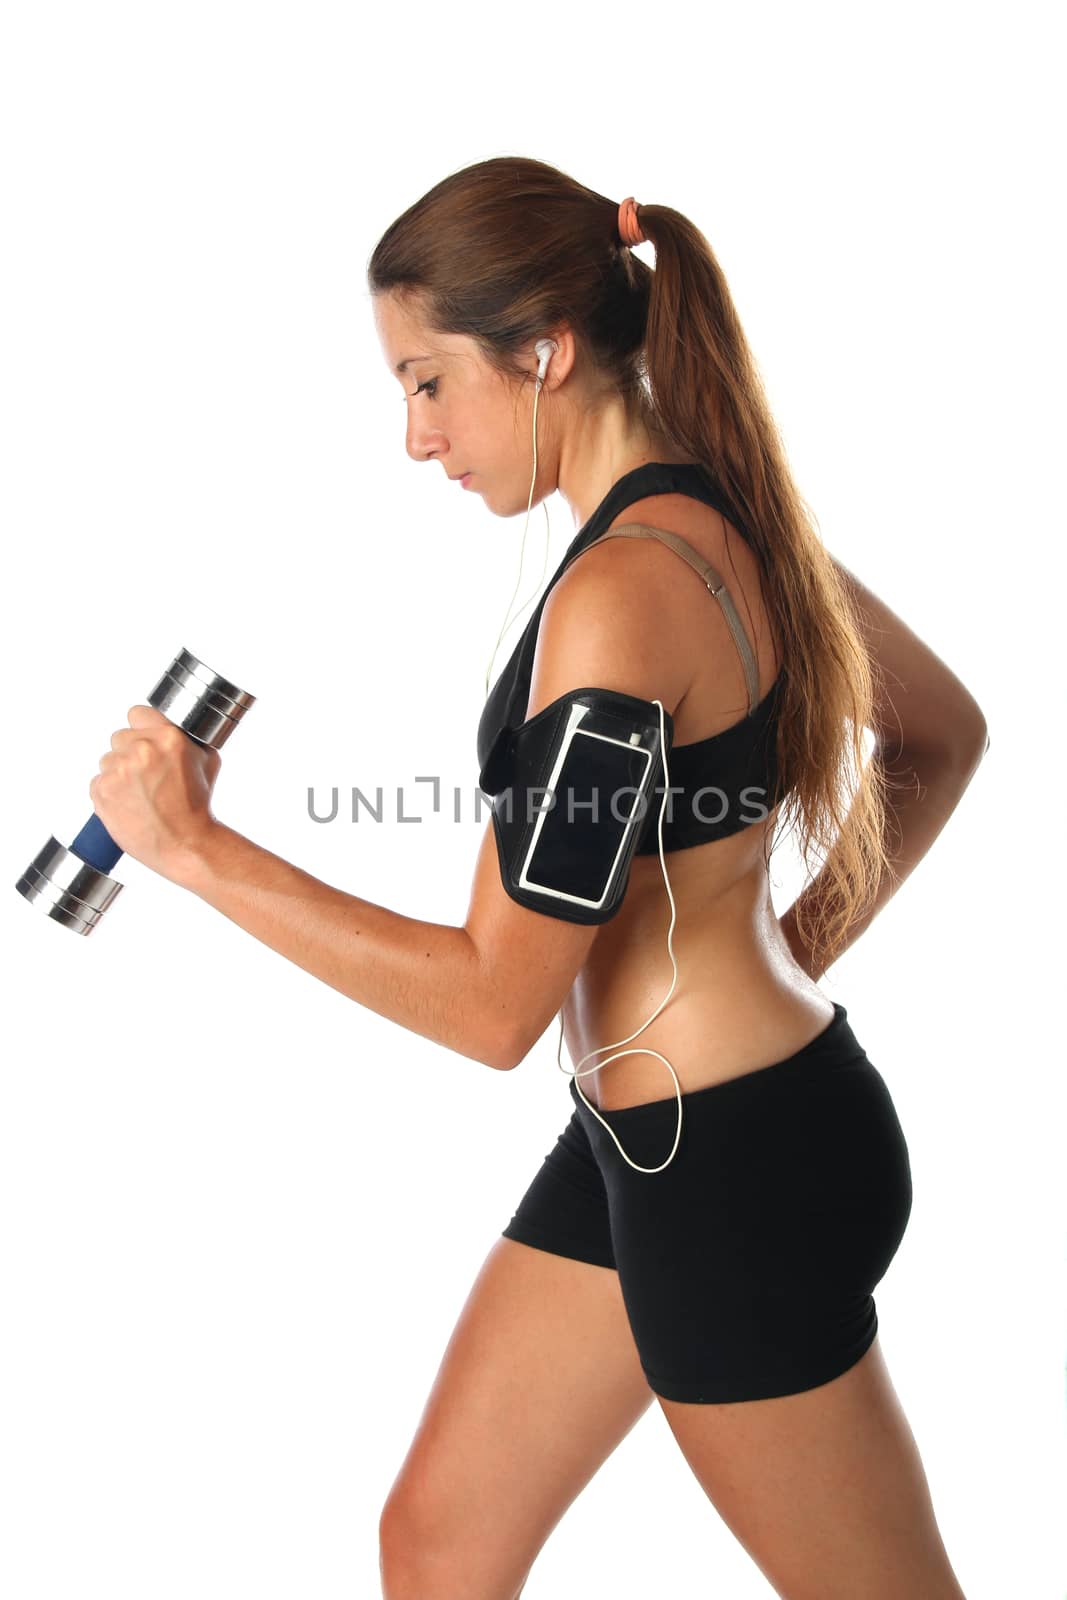 Young woman exercising with dumbbells and a smartphone. Isolated